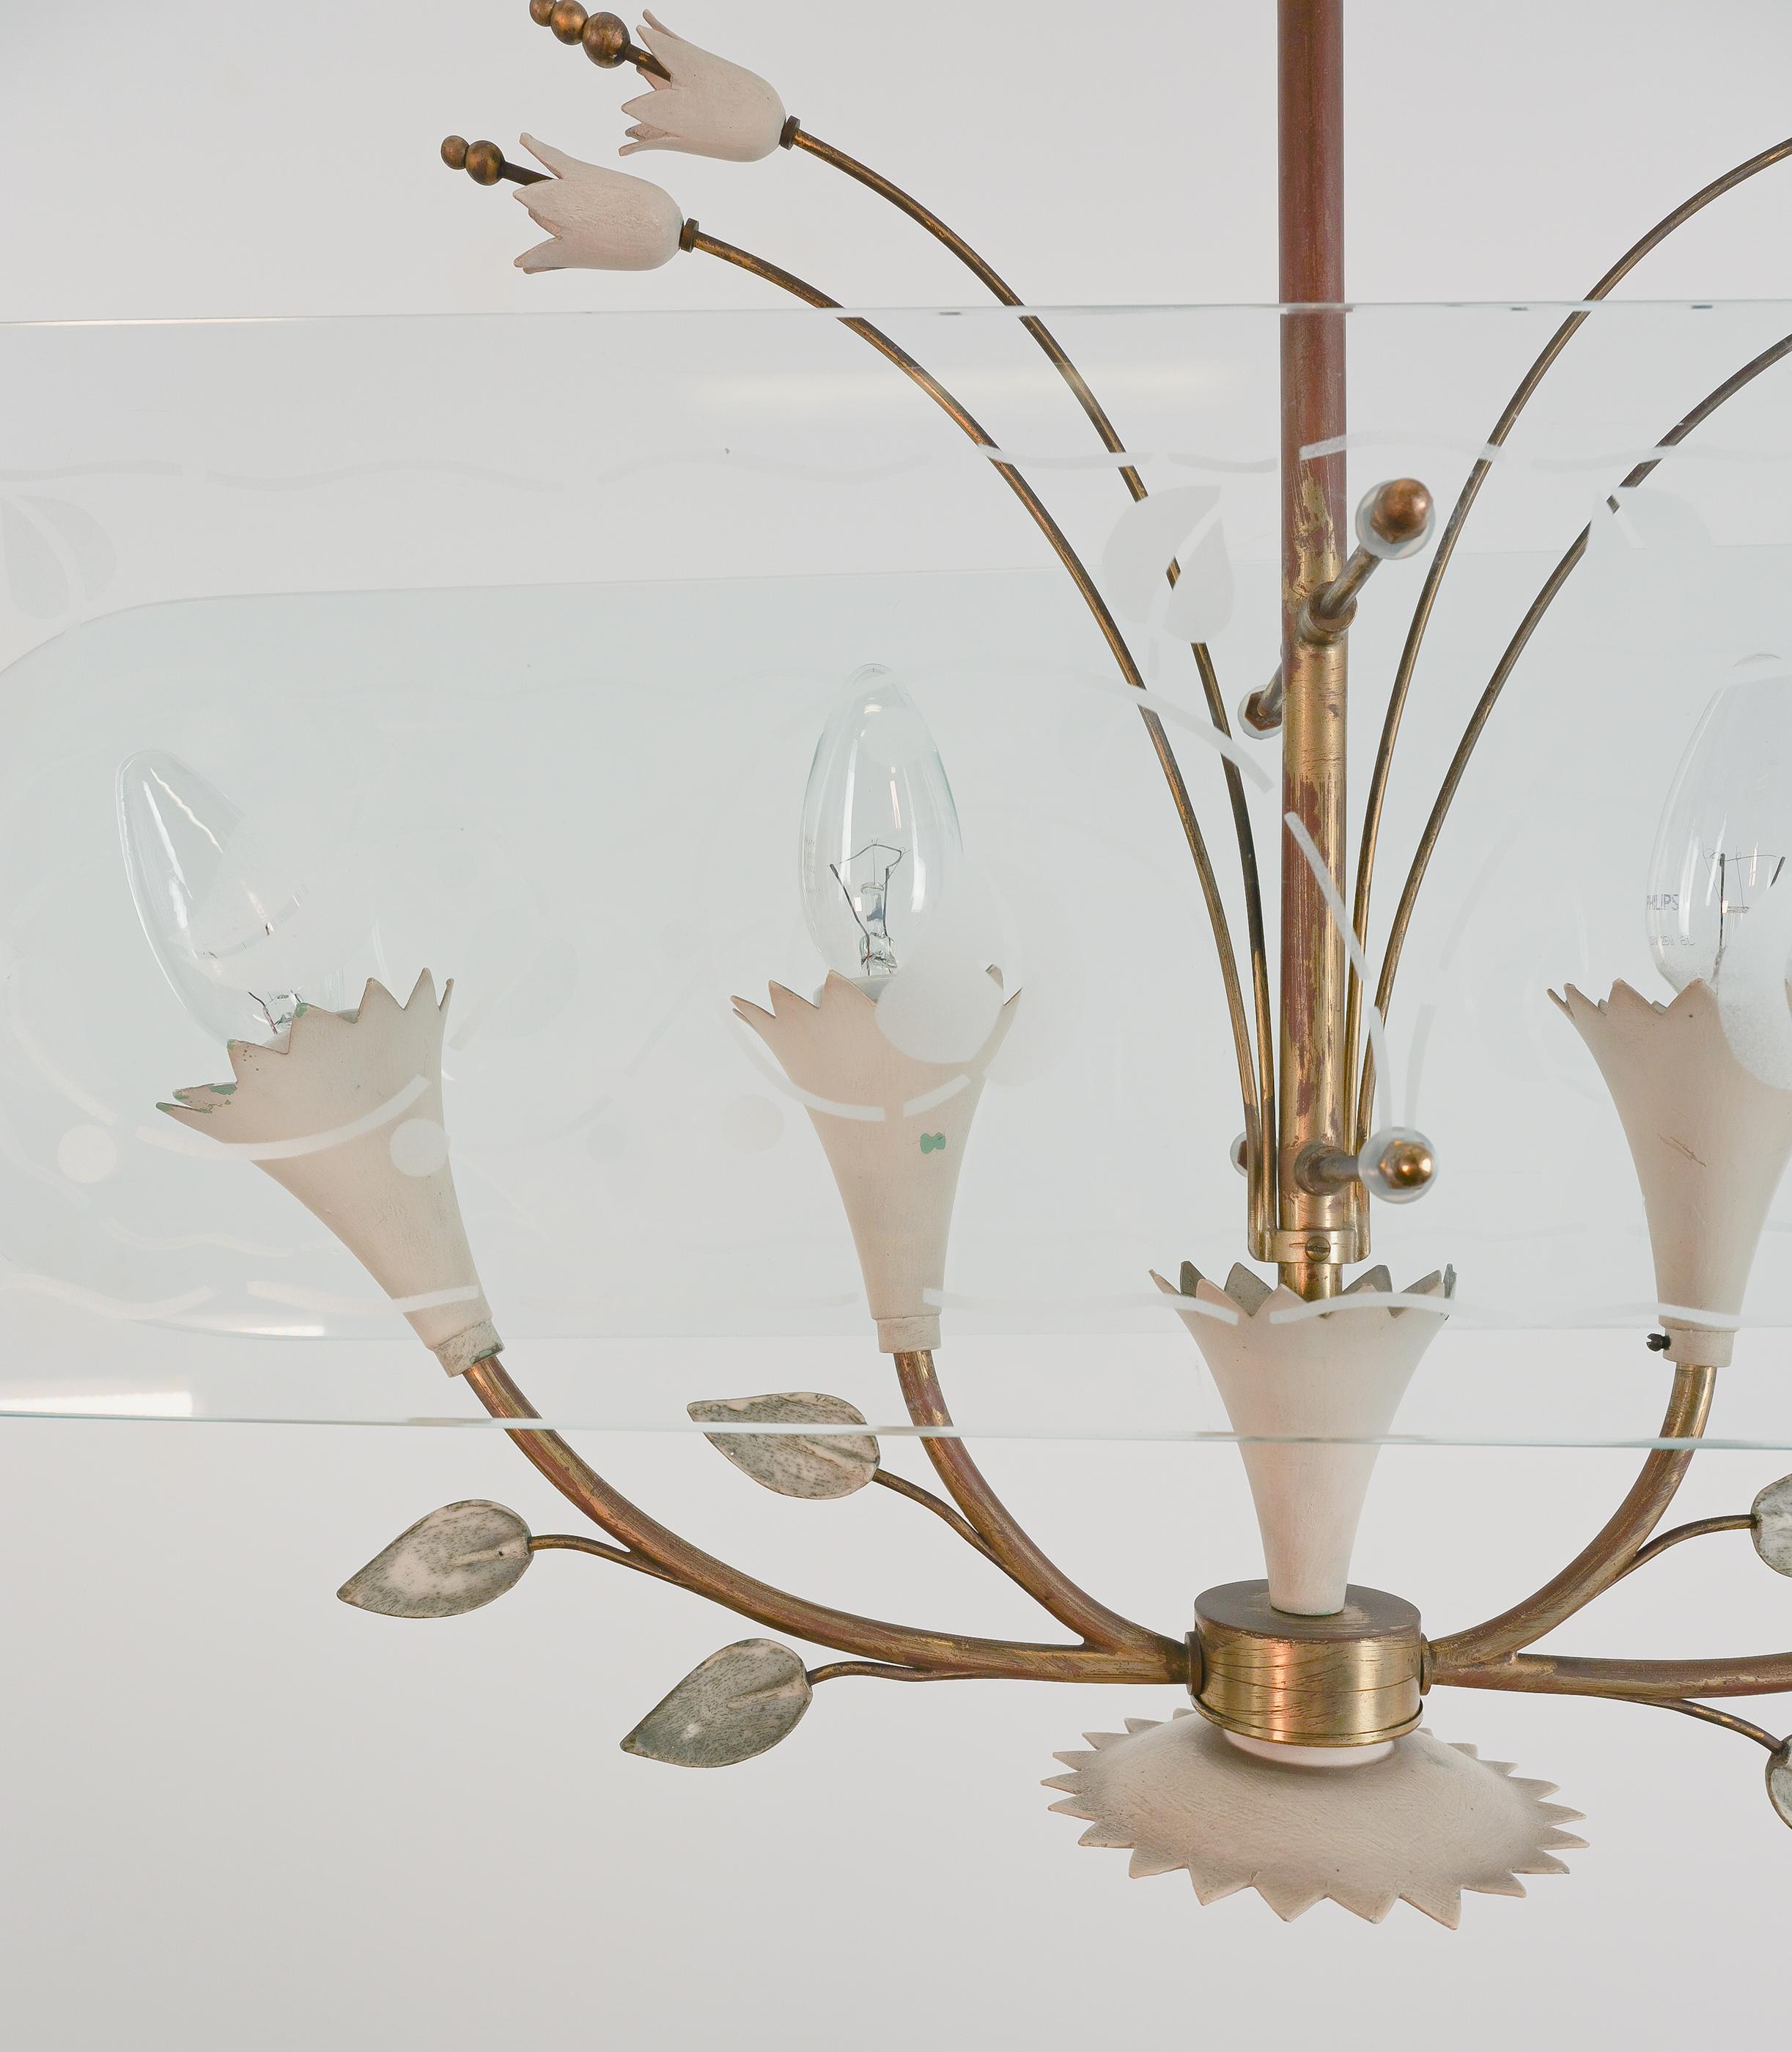 Pietro Chiesa Chandelier Floral Glass with Etched Details Italy, 1950 For Sale 3